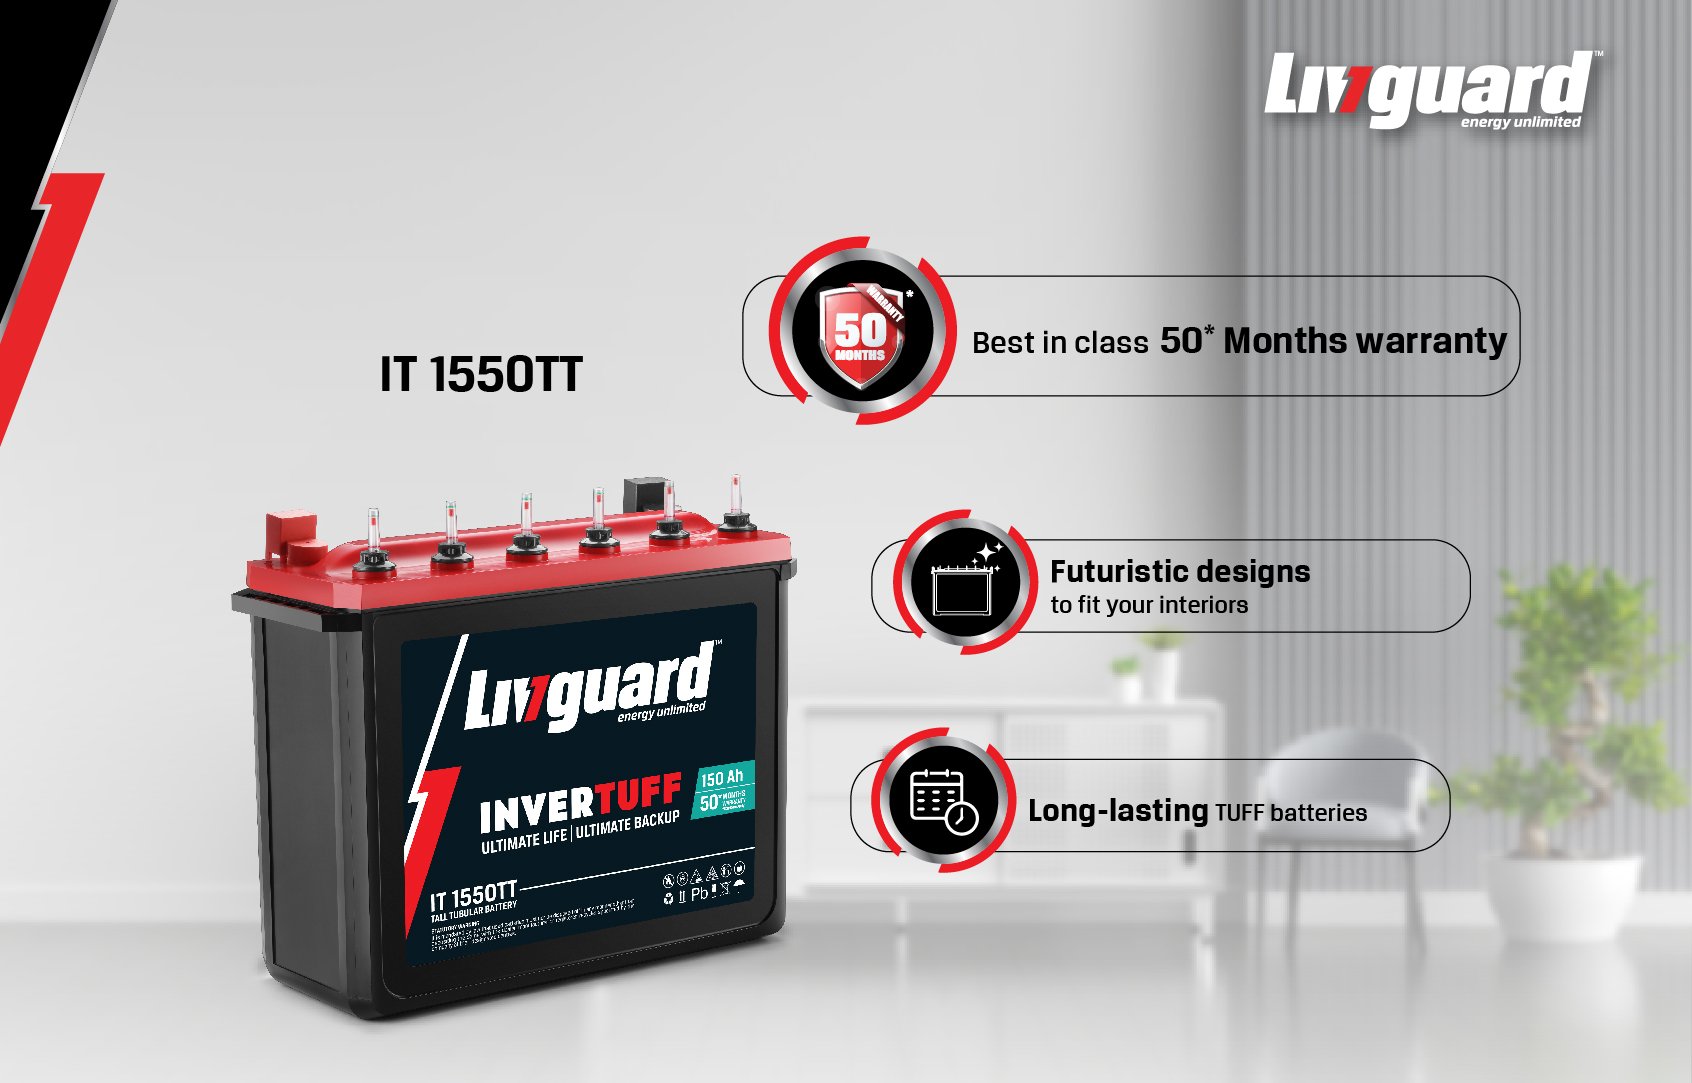 Livguard Solar Panels: Power-Packed, Resilient, Sustainable